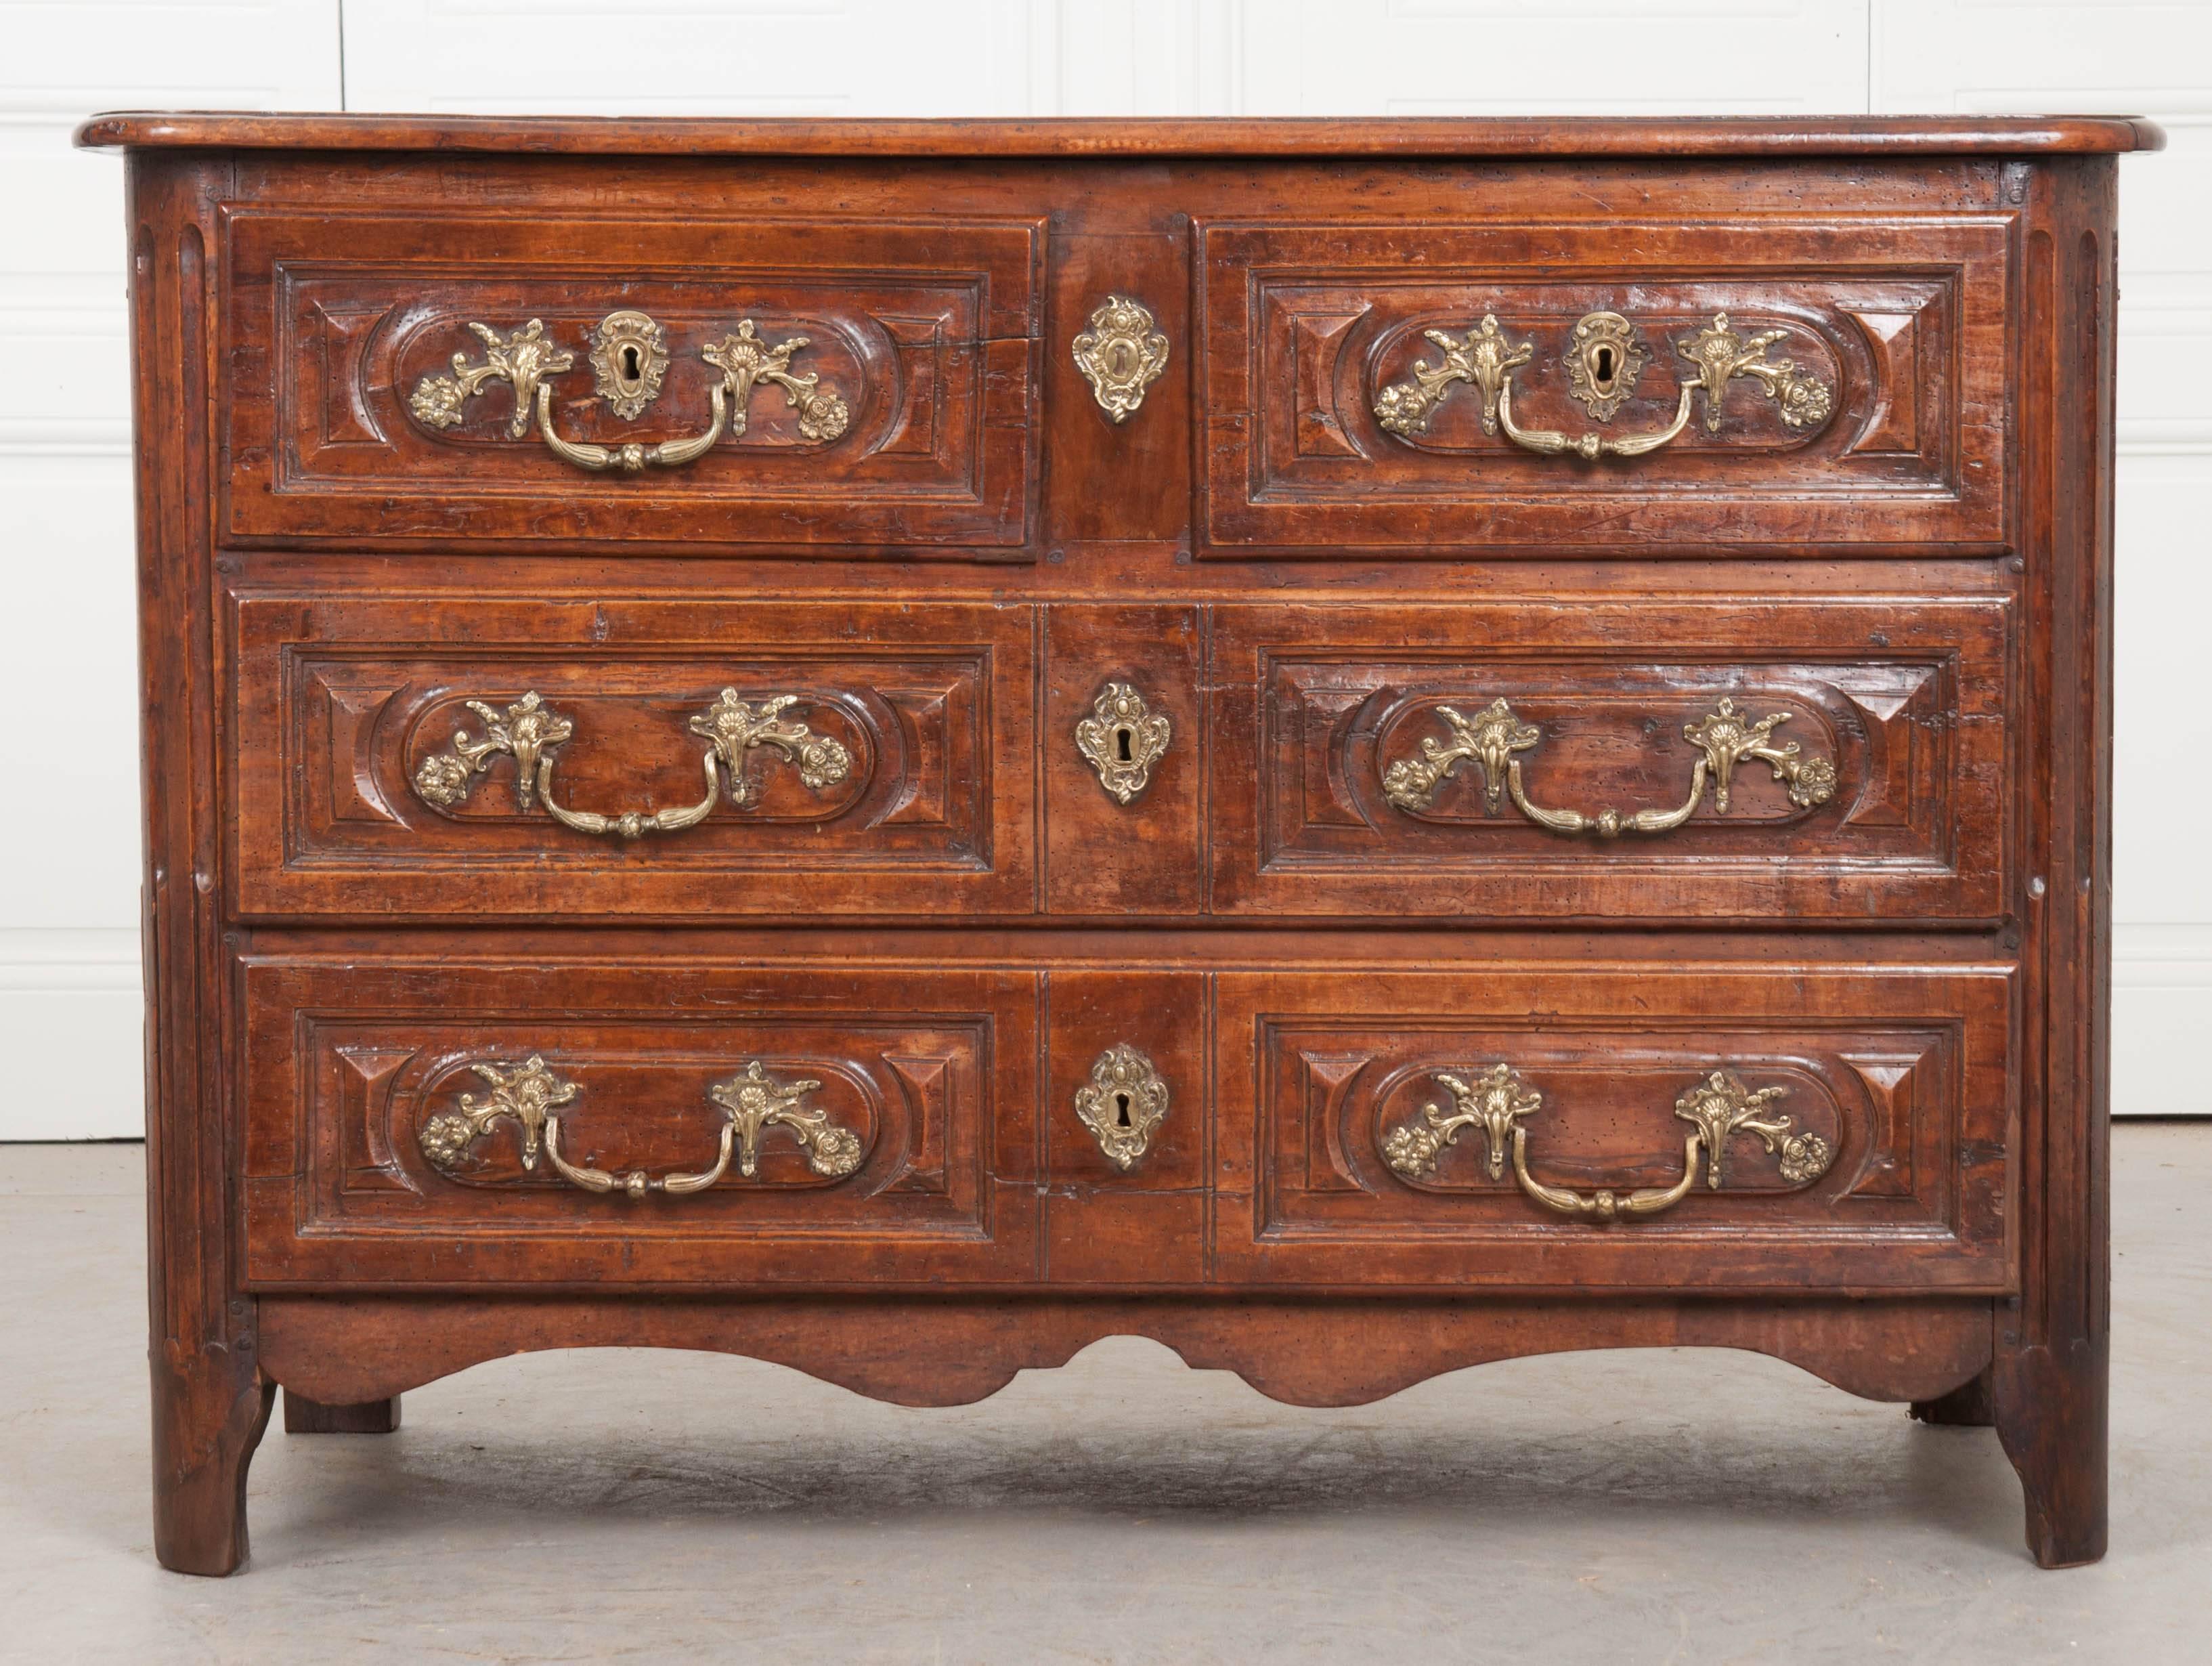 A stunning solid walnut Louis XV commode from 18th century, France. The beautiful walnut used to construct the commode has been hand-carved and fastened together using peg and hole joinery. Each of the four drawers has extraordinary brass hardware.